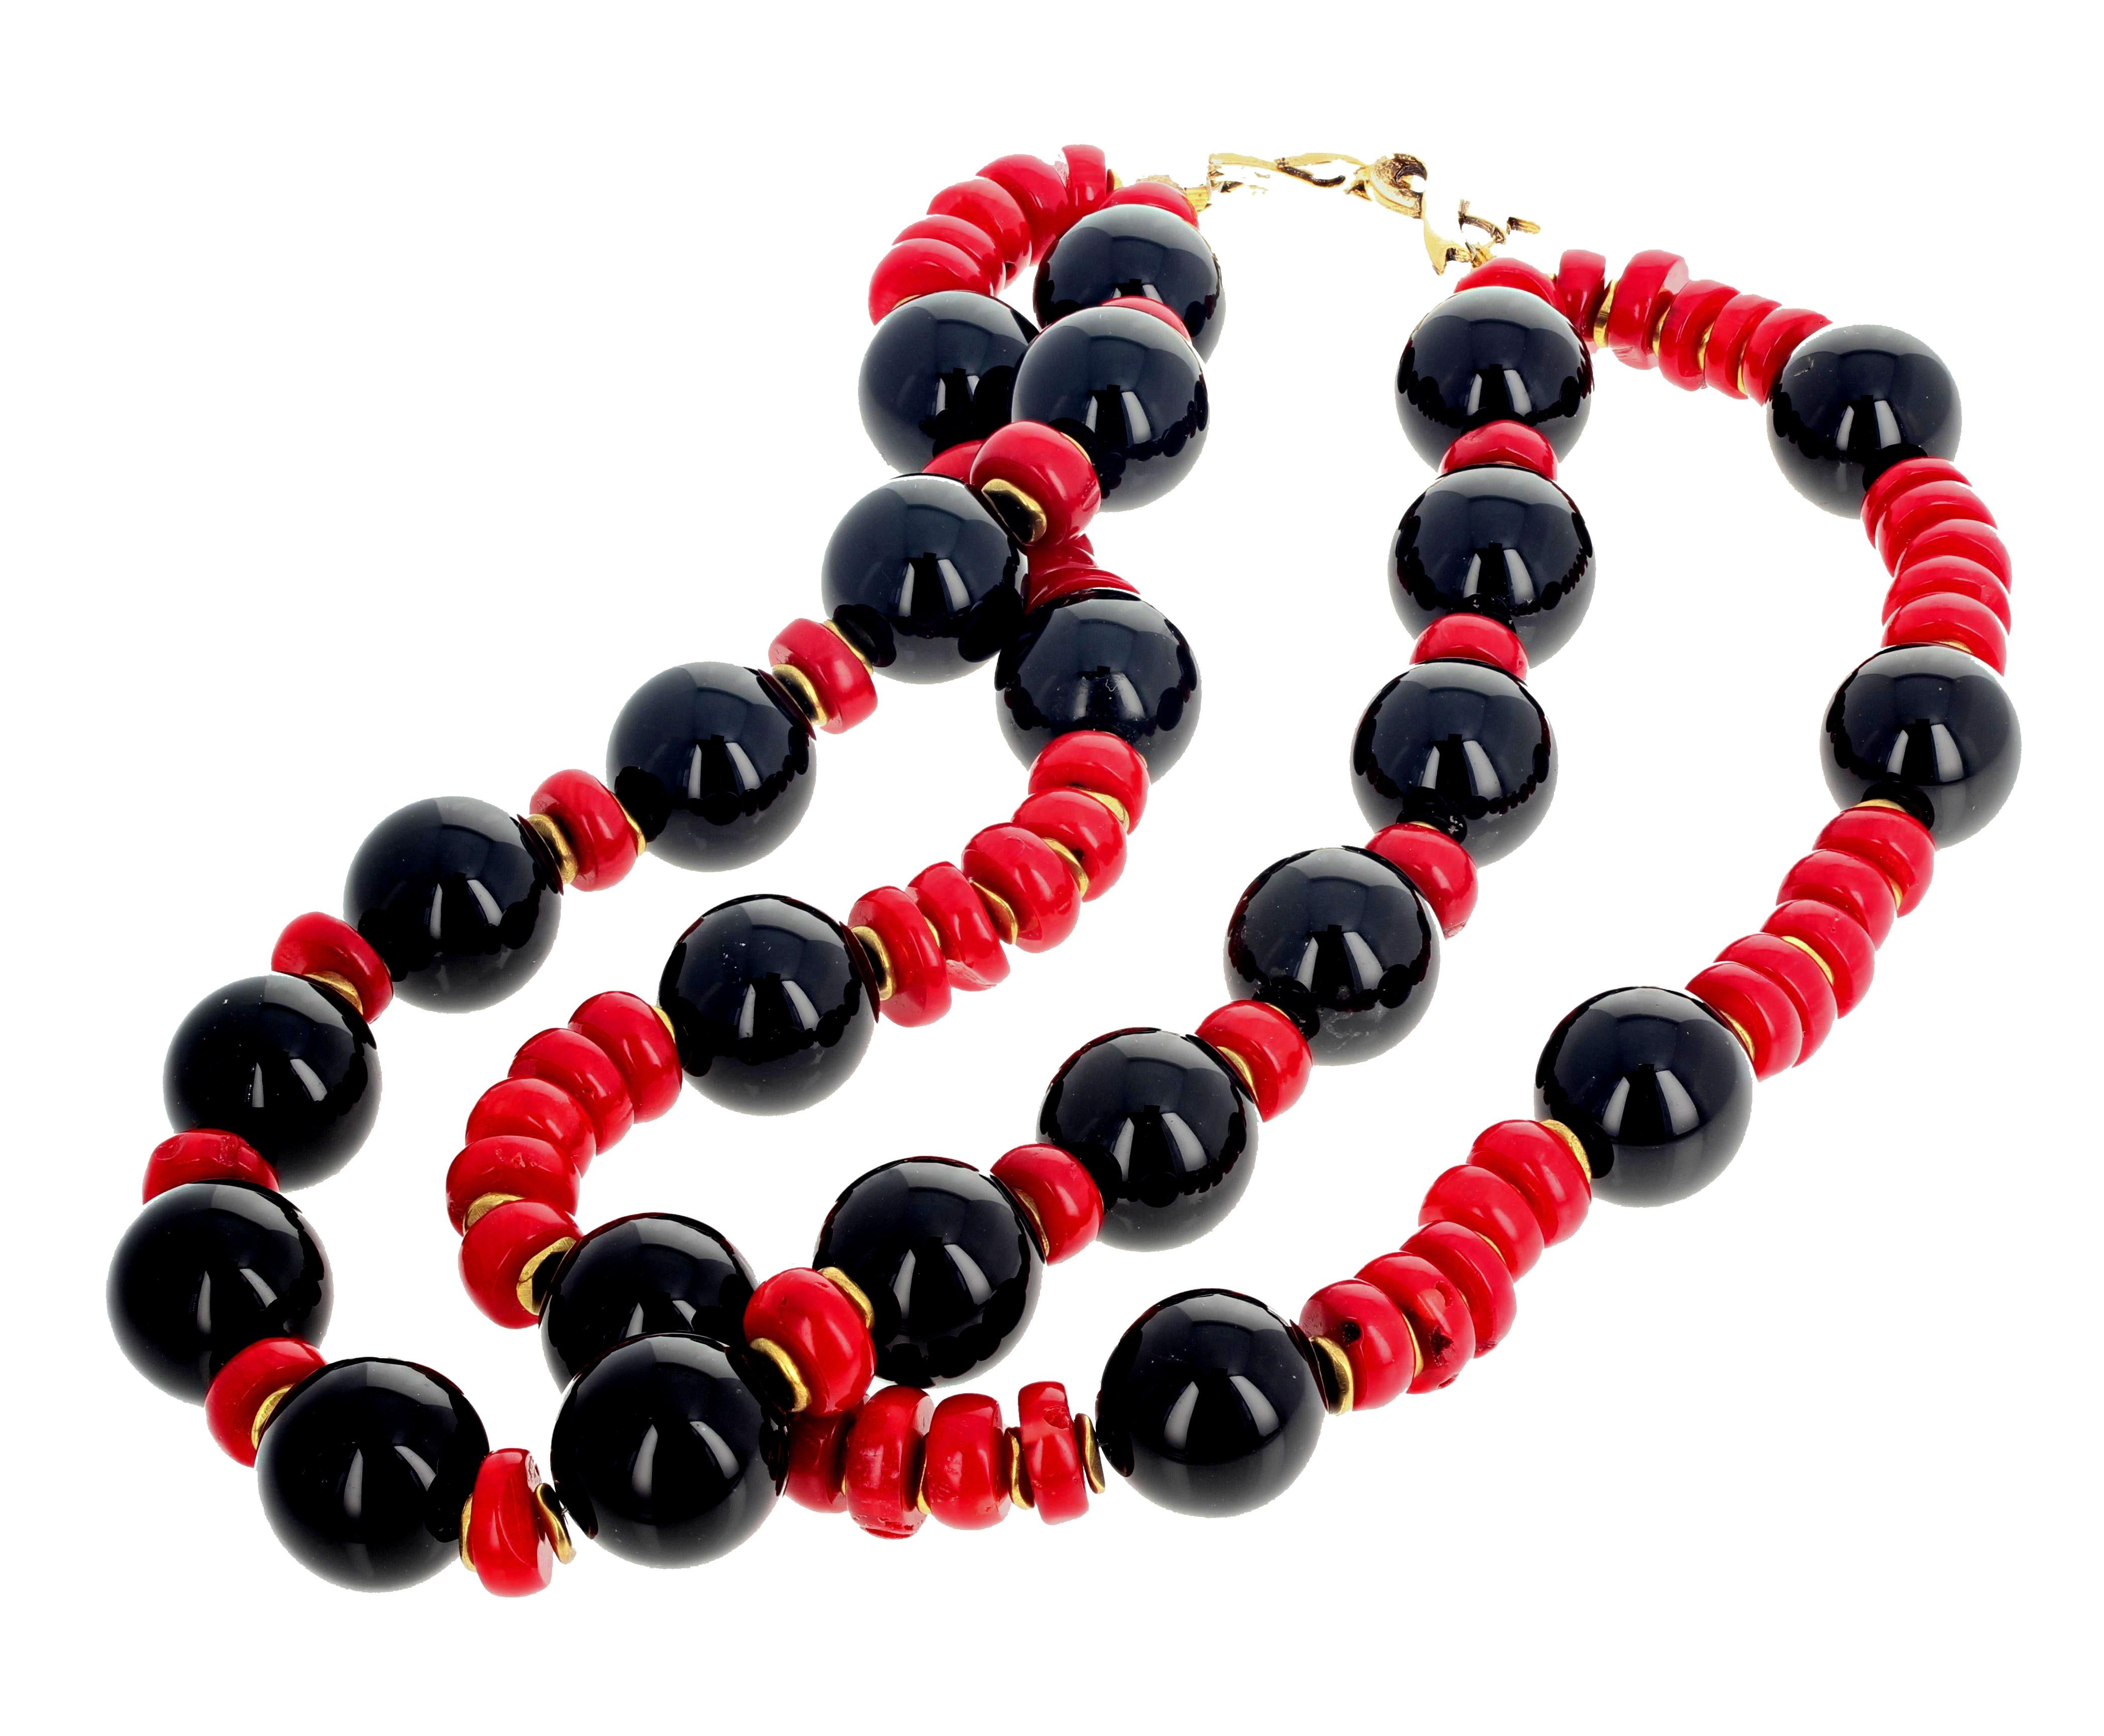 Double strand of highly polished glowing natural black Onyx (18 mm) enhanced with rondels of natural red Bamboo Coral set in this double strand necklace with gold tone easy to use hook clasp.  This necklace is 17 inches long and sits elegantly